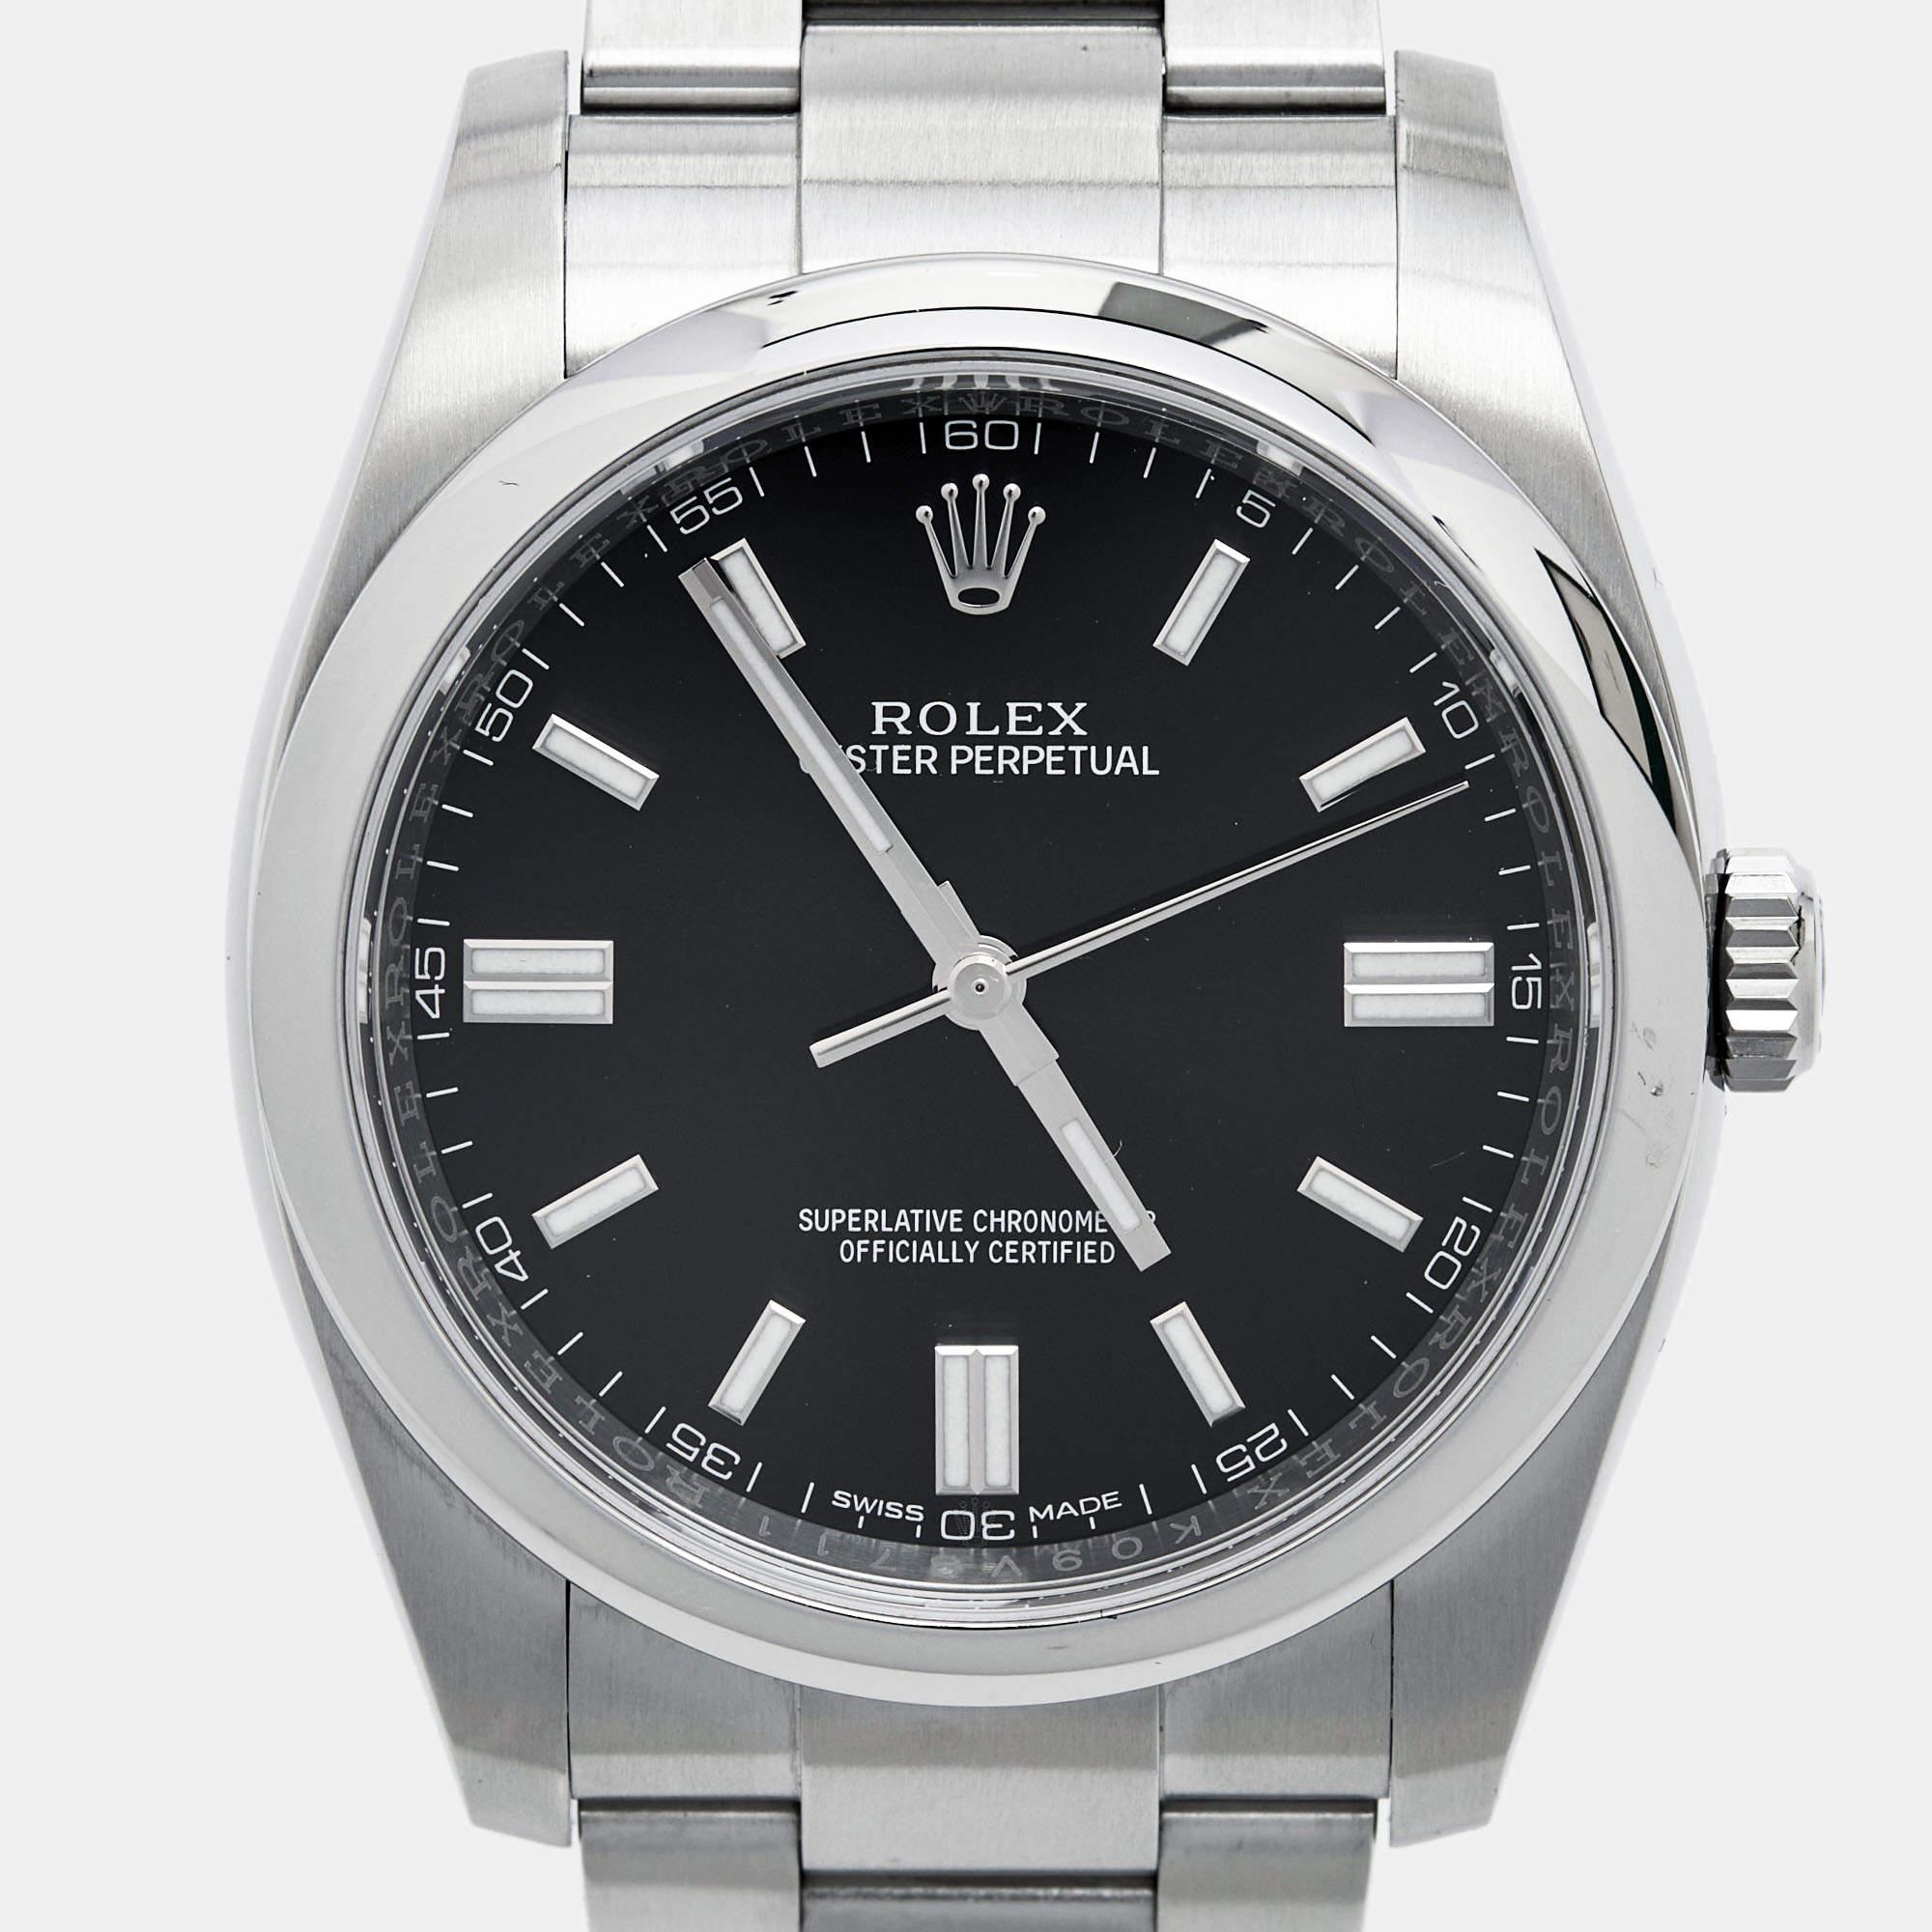 Let this authentic Rolex Oyster Perpetual 116000-0013 timepiece help you make every moment count! Created with skill using high-grade materials, this watch is a functional accessory designed to impart a luxurious style while keeping you on